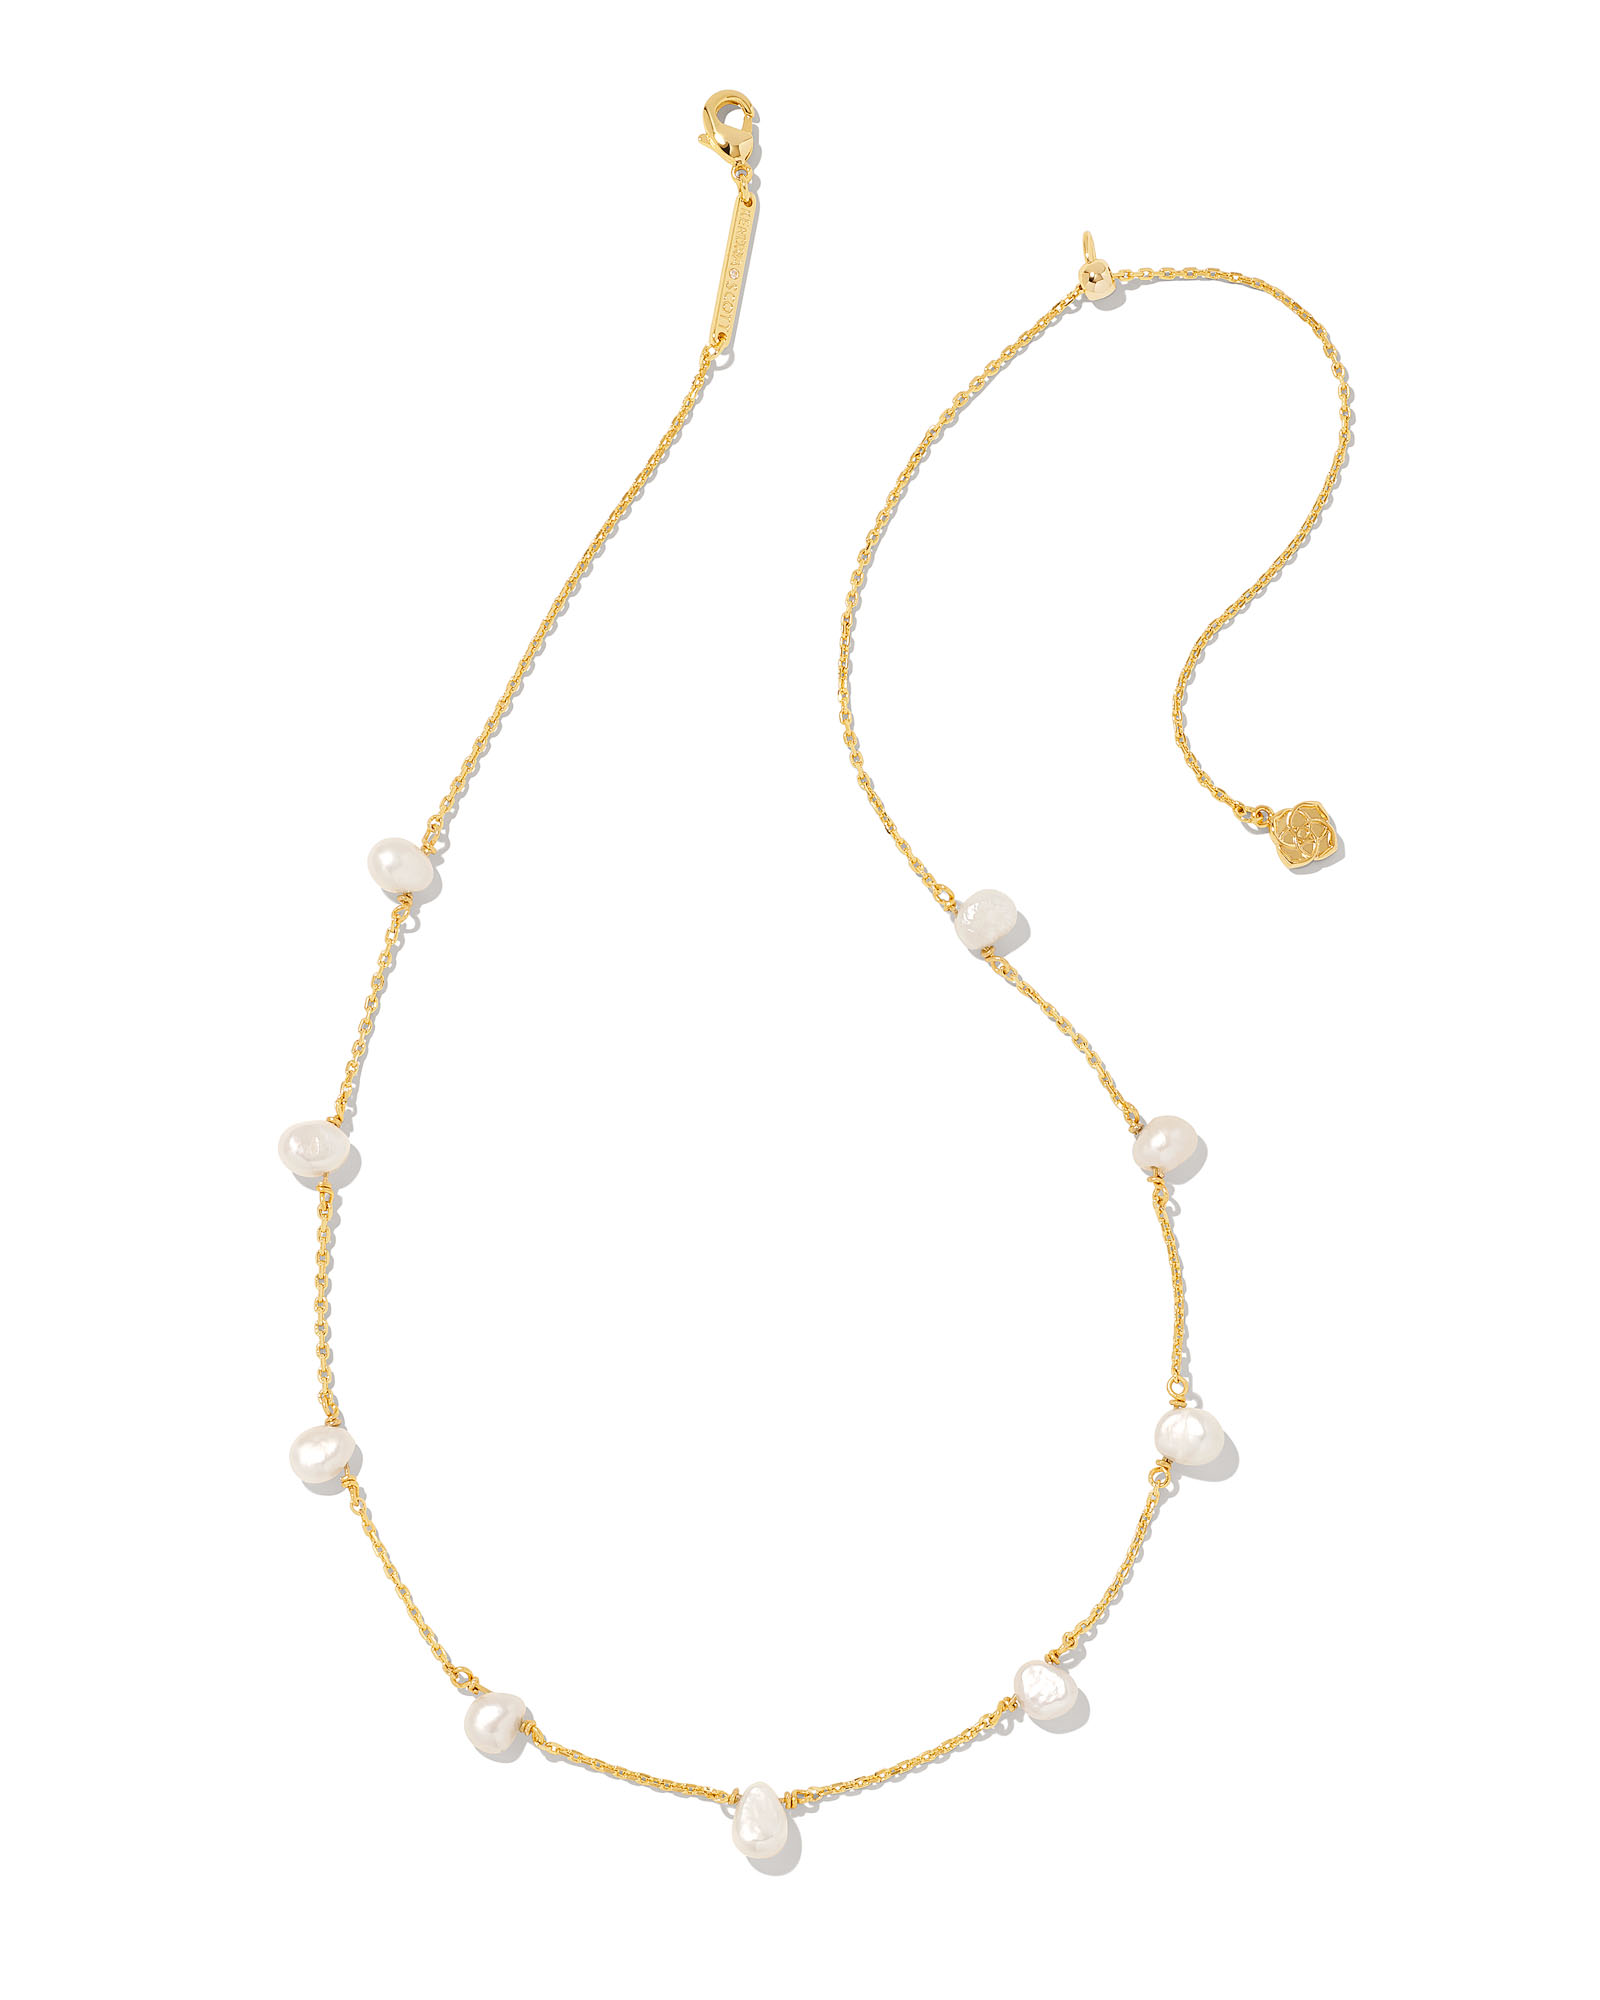 MIKIMOTO 4mm White South Sea Cultured Pearl Necklace in 18K YG | APR57